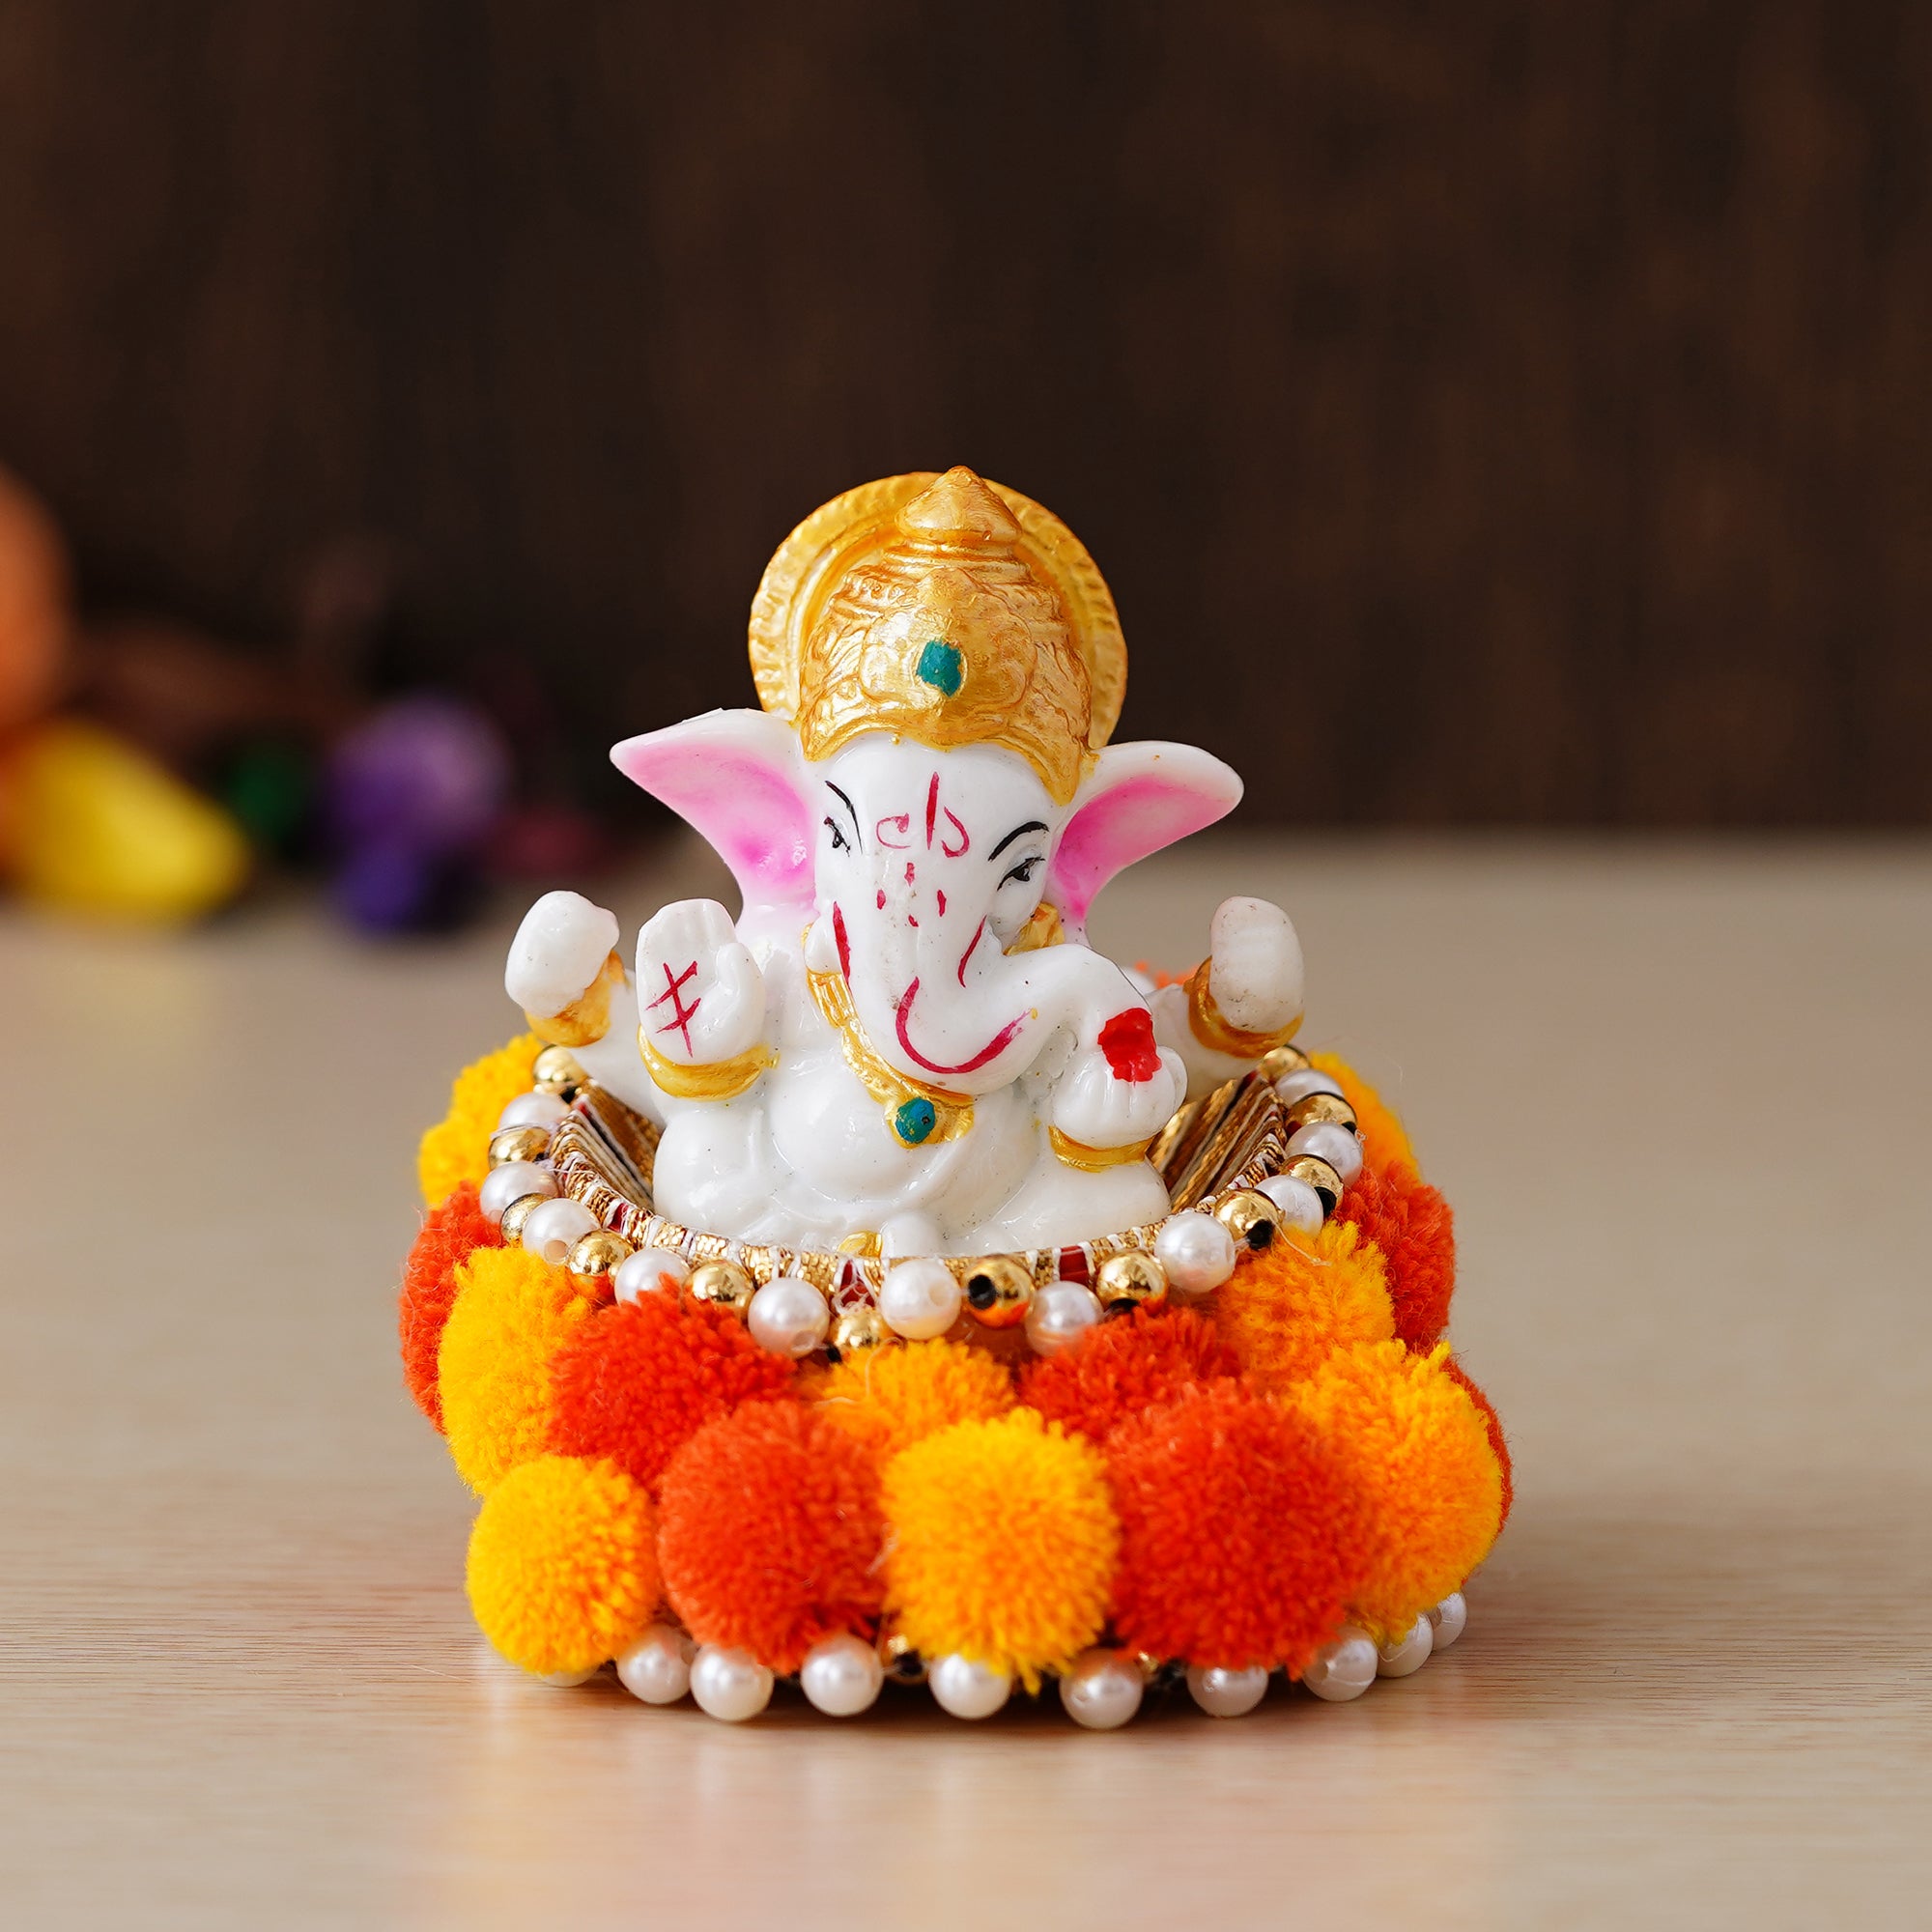 Polyresin Lord Ganesha Idol on Decorative Handcrafted Floral Plate for Home and Car Dashboard